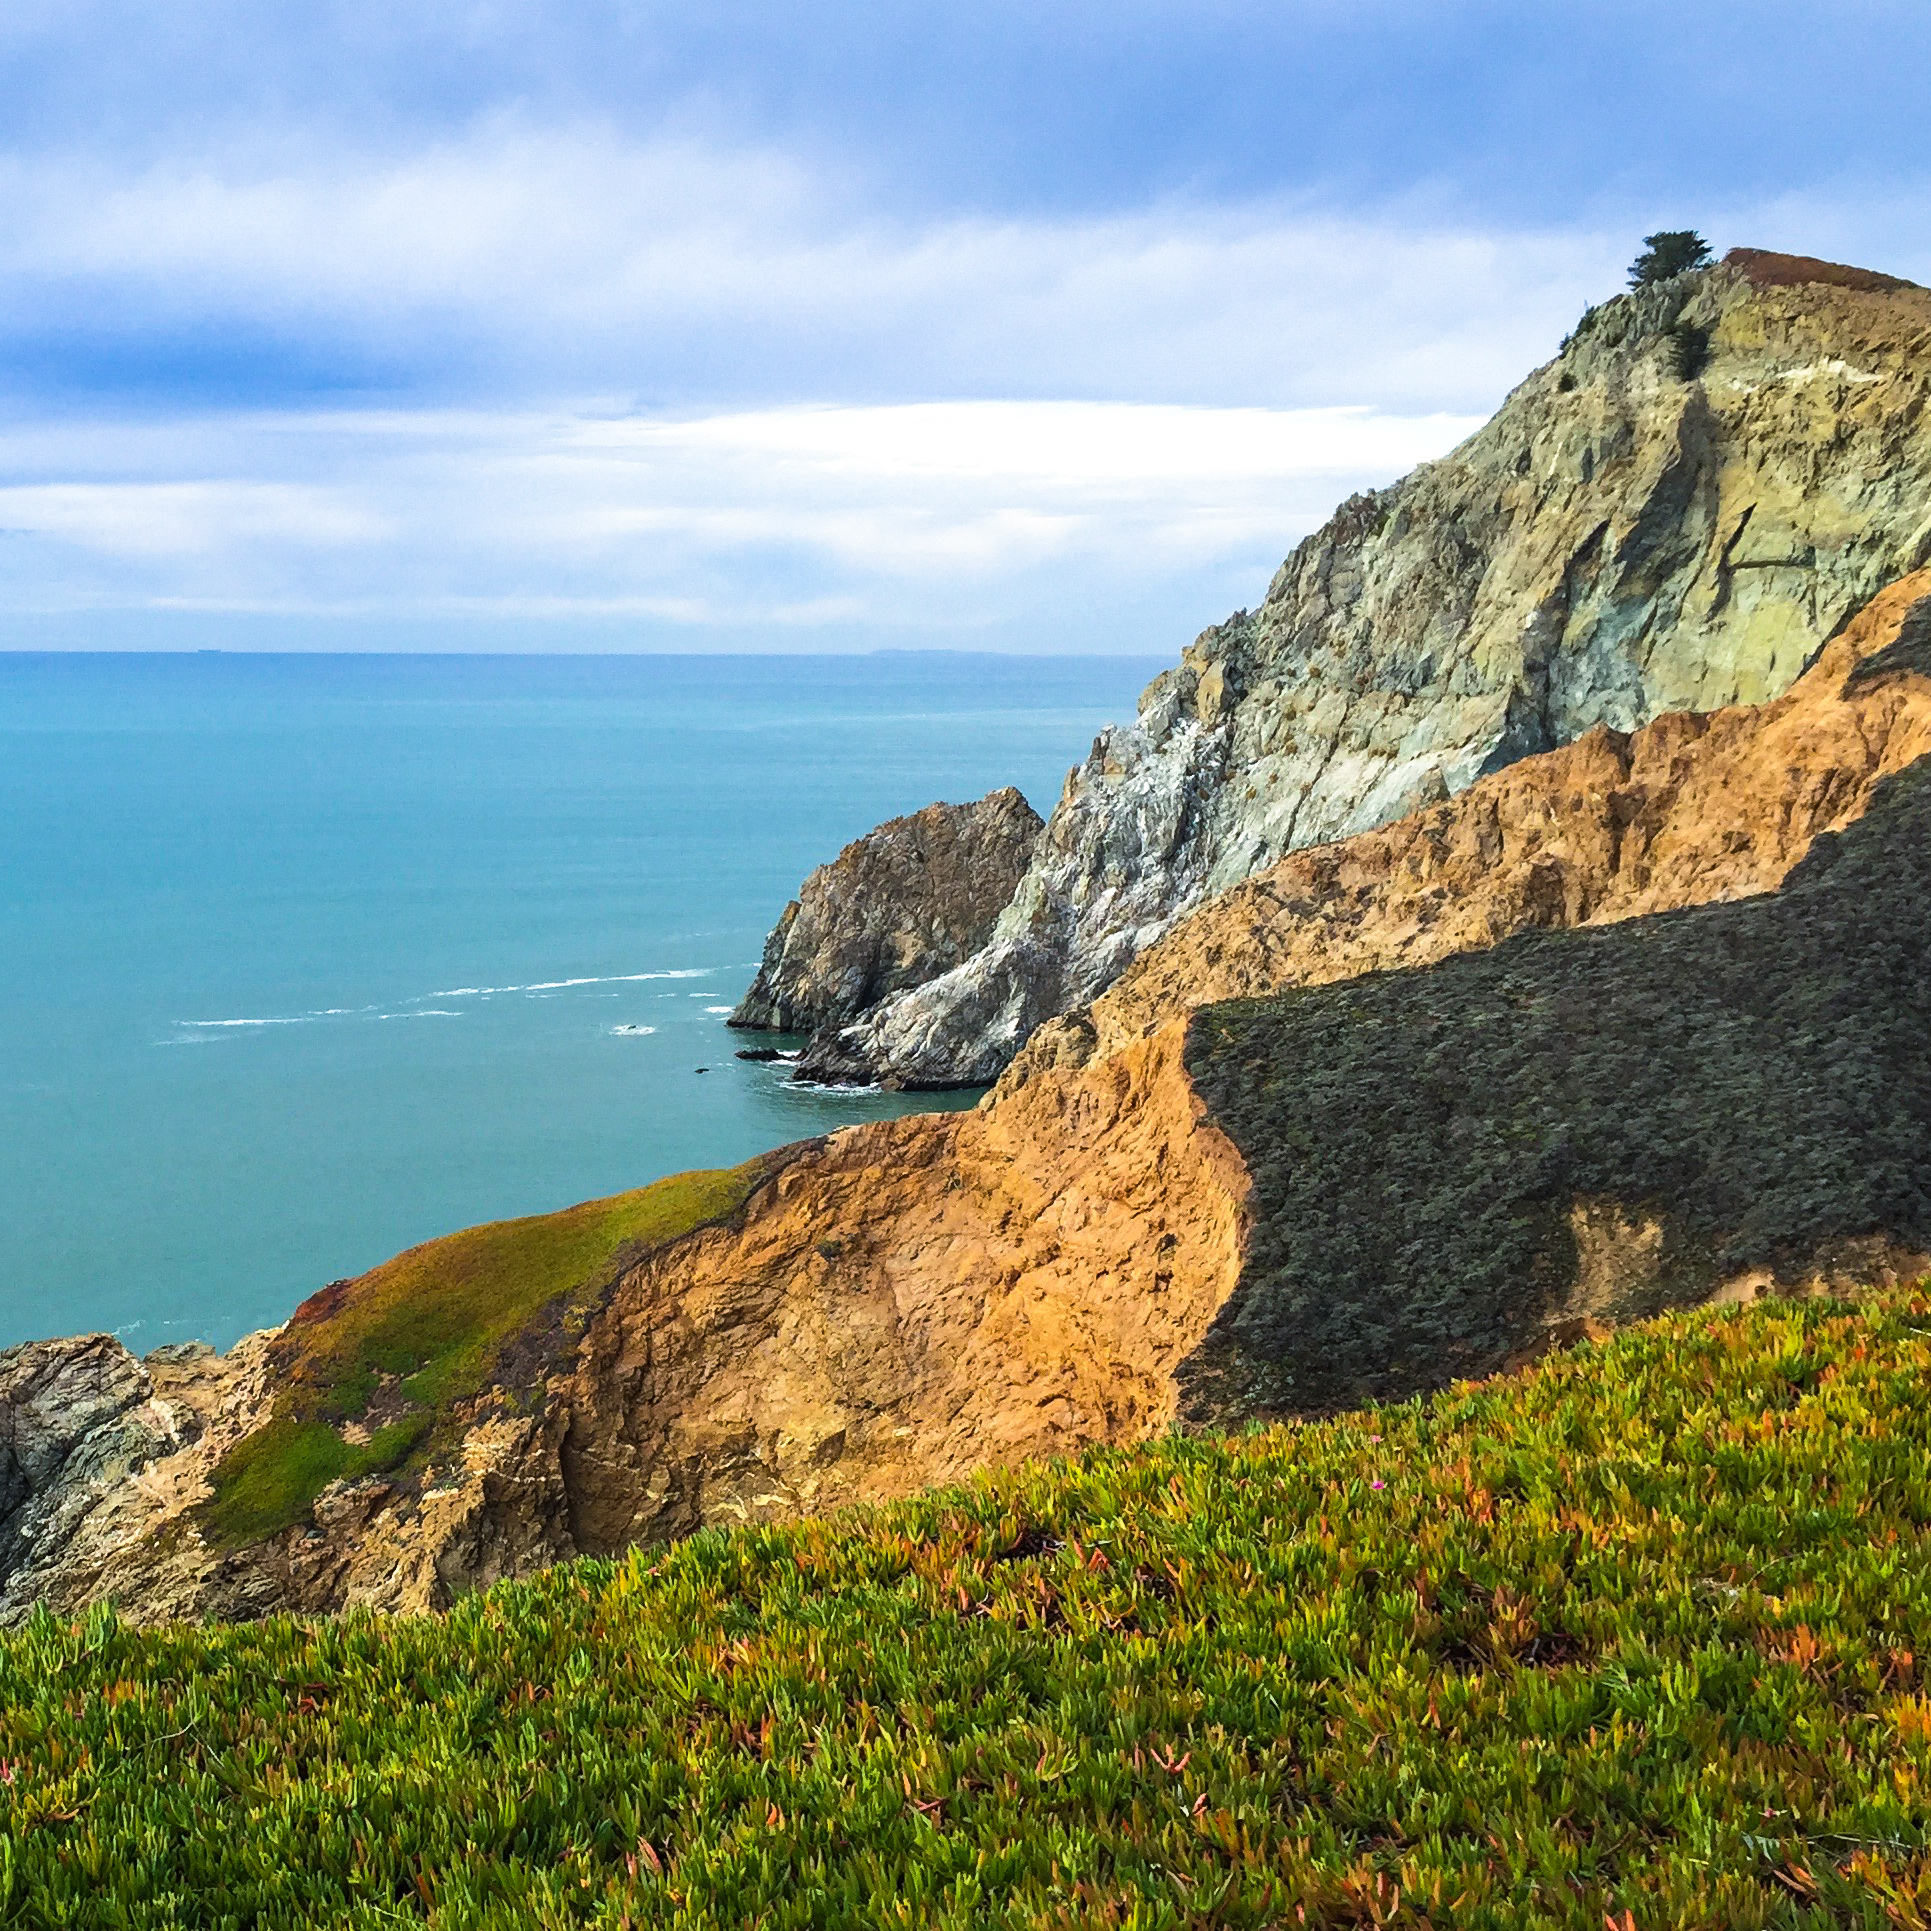 Views from the Devil’s Slide Trail in Pacifica, California.